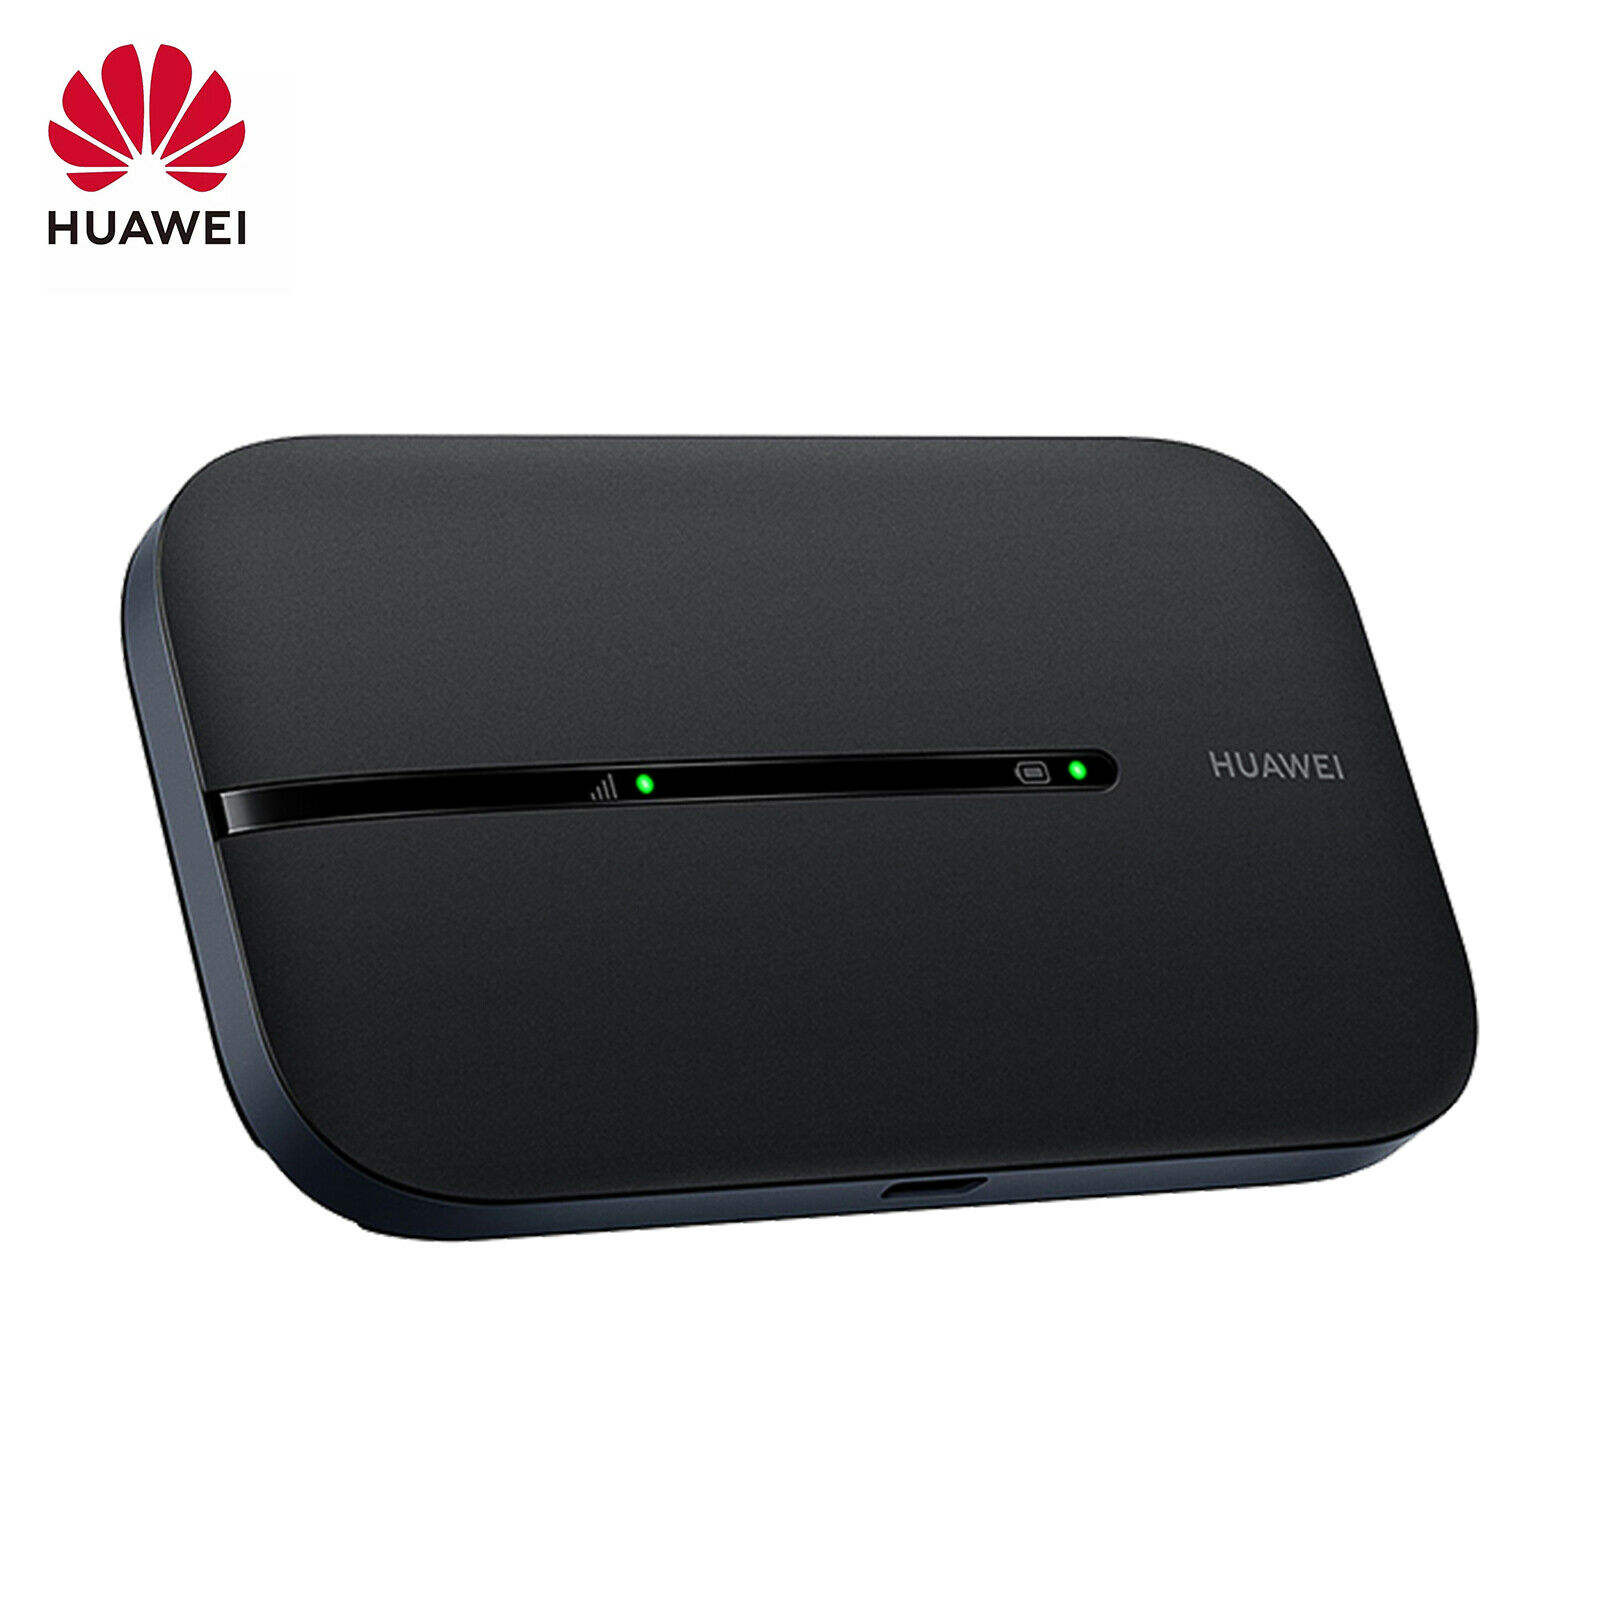 Huawei Unlock Wifi Pocket Router All Sim Support Original E5576 606 Portable Wifi Router 3g4g 3444